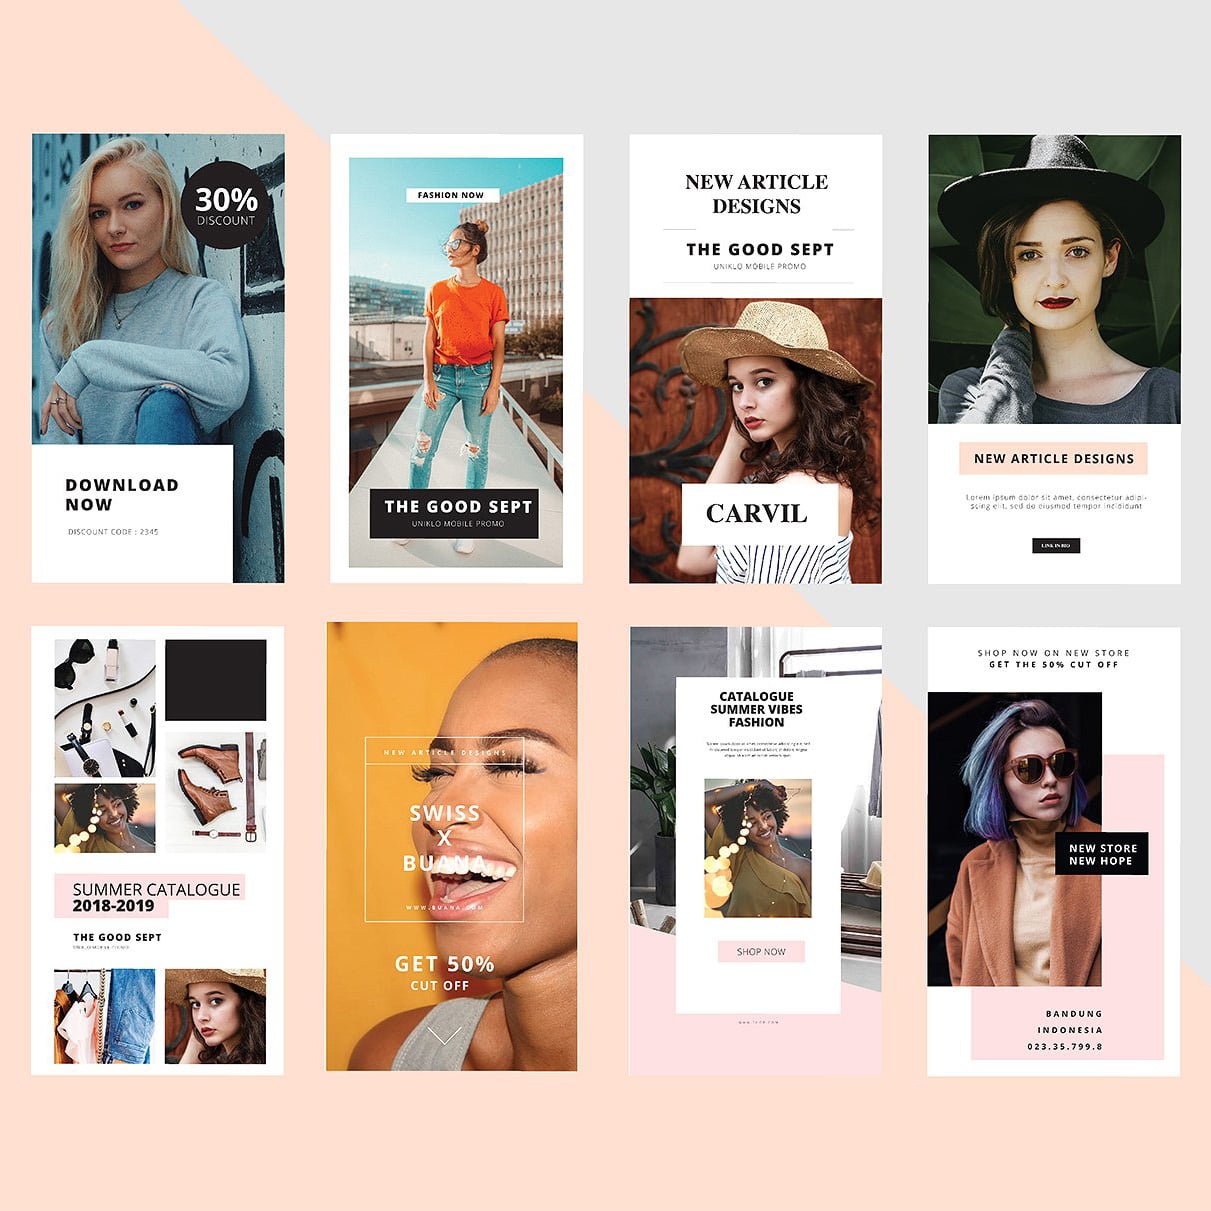 Animation Instagram Stories and PowerPoint Templates cover image.